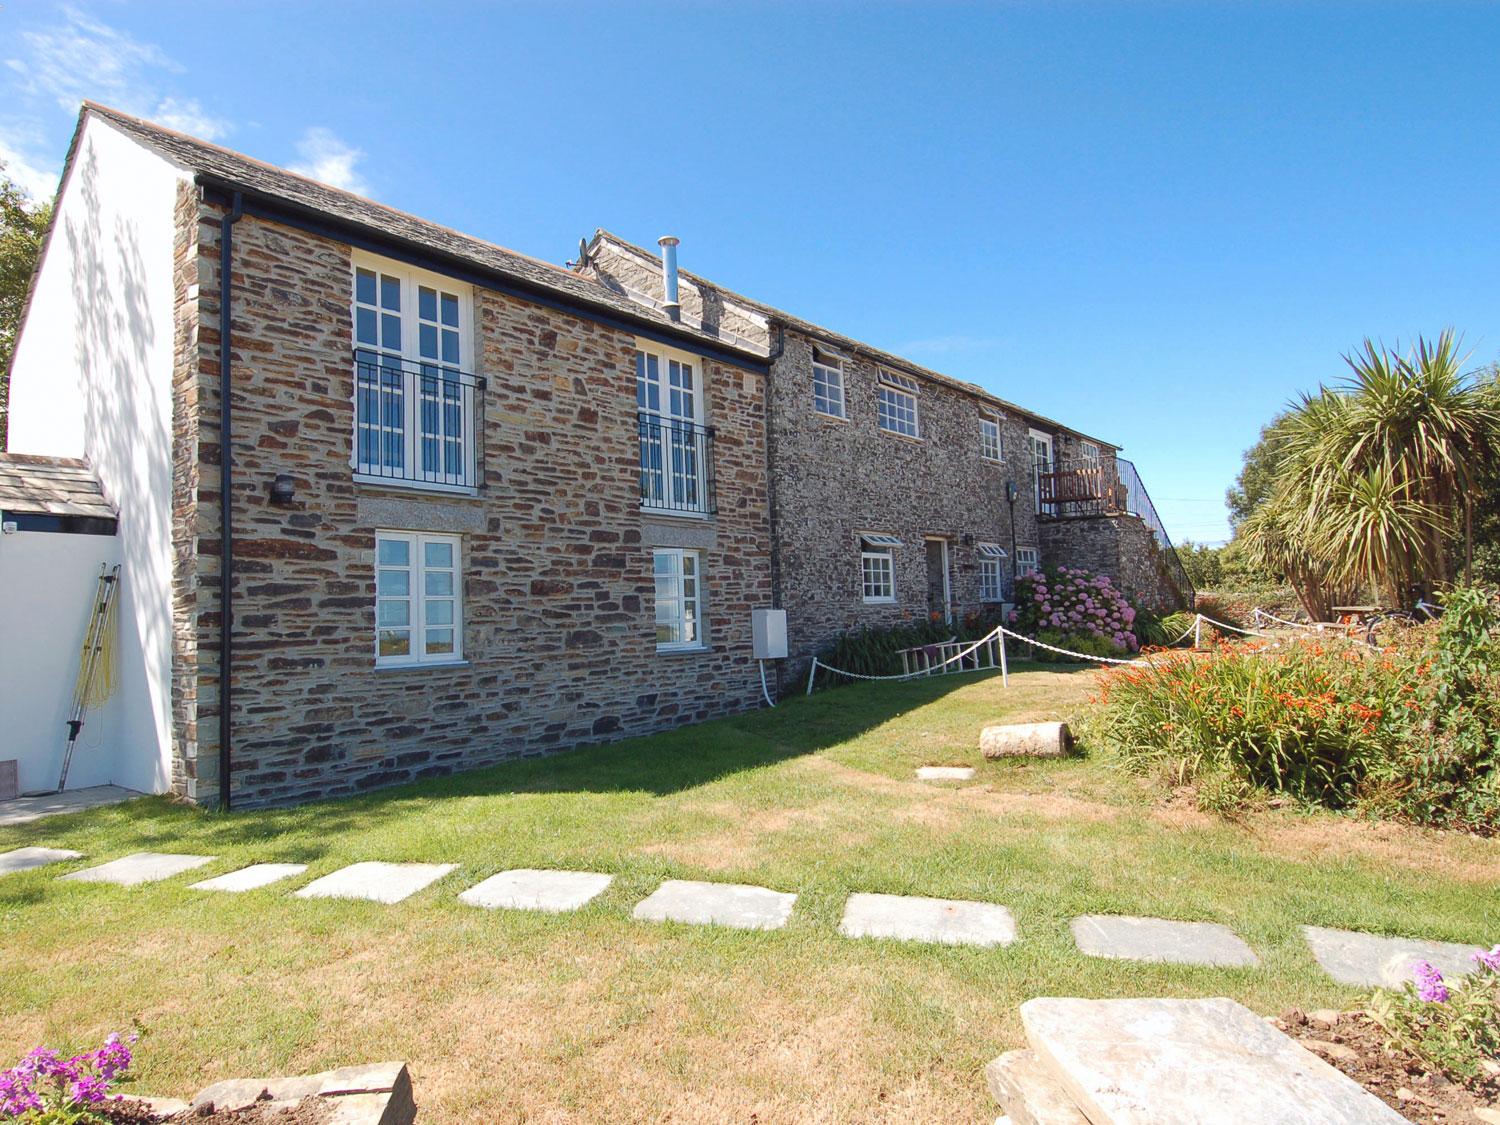 Holiday Cottage Reviews for Atlantic View - Self Catering in Tintagel, Cornwall inc Scilly